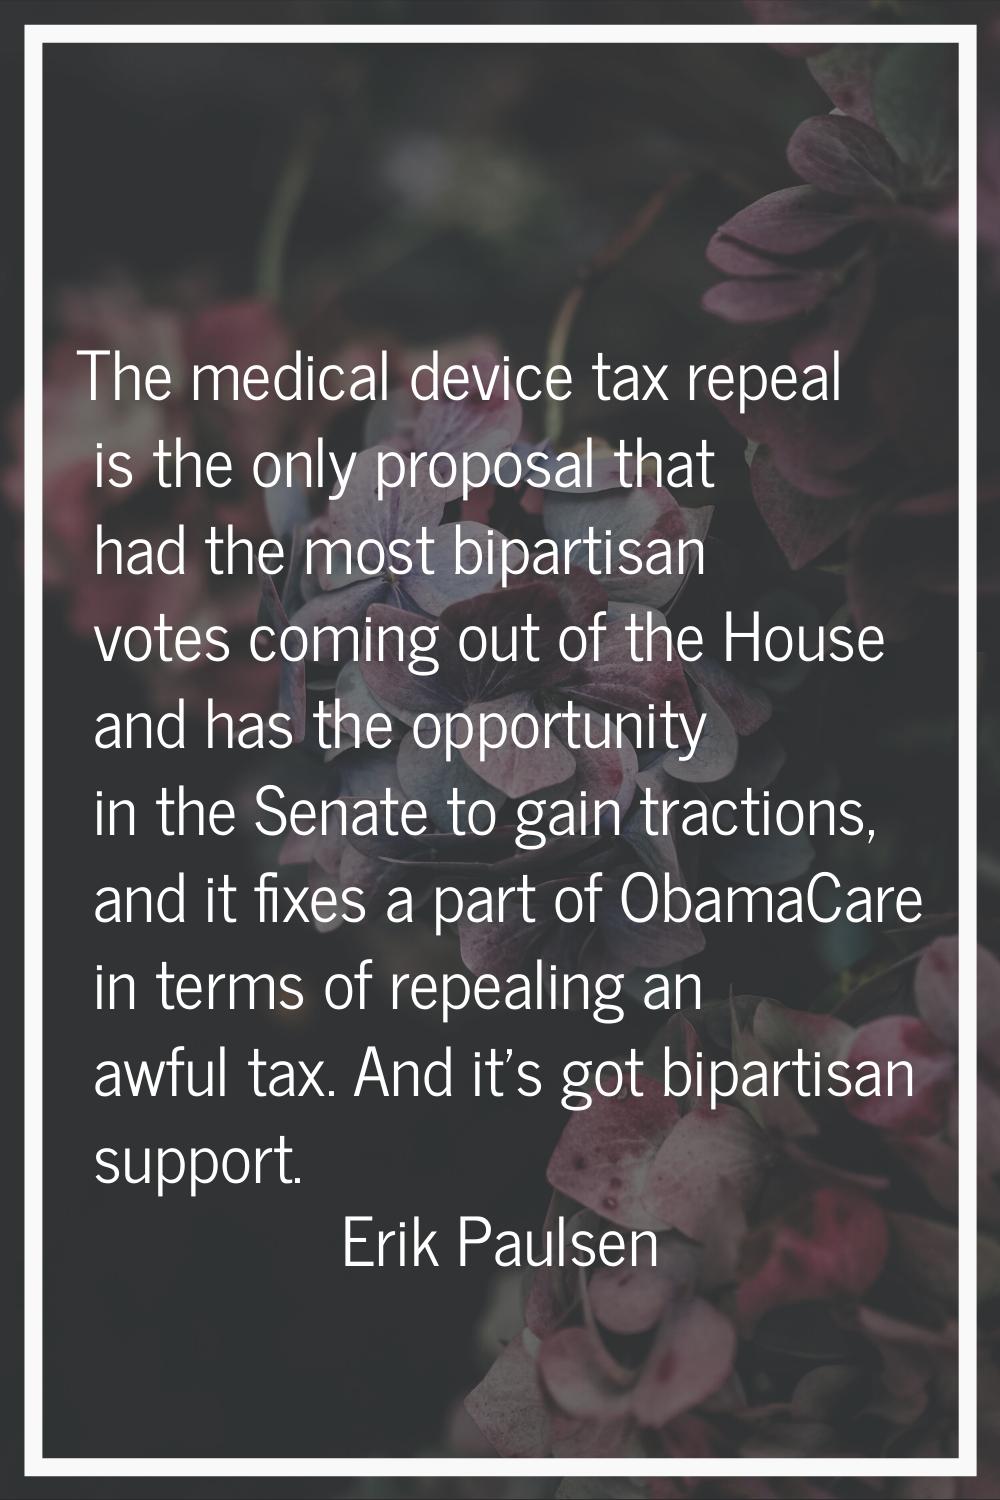 The medical device tax repeal is the only proposal that had the most bipartisan votes coming out of